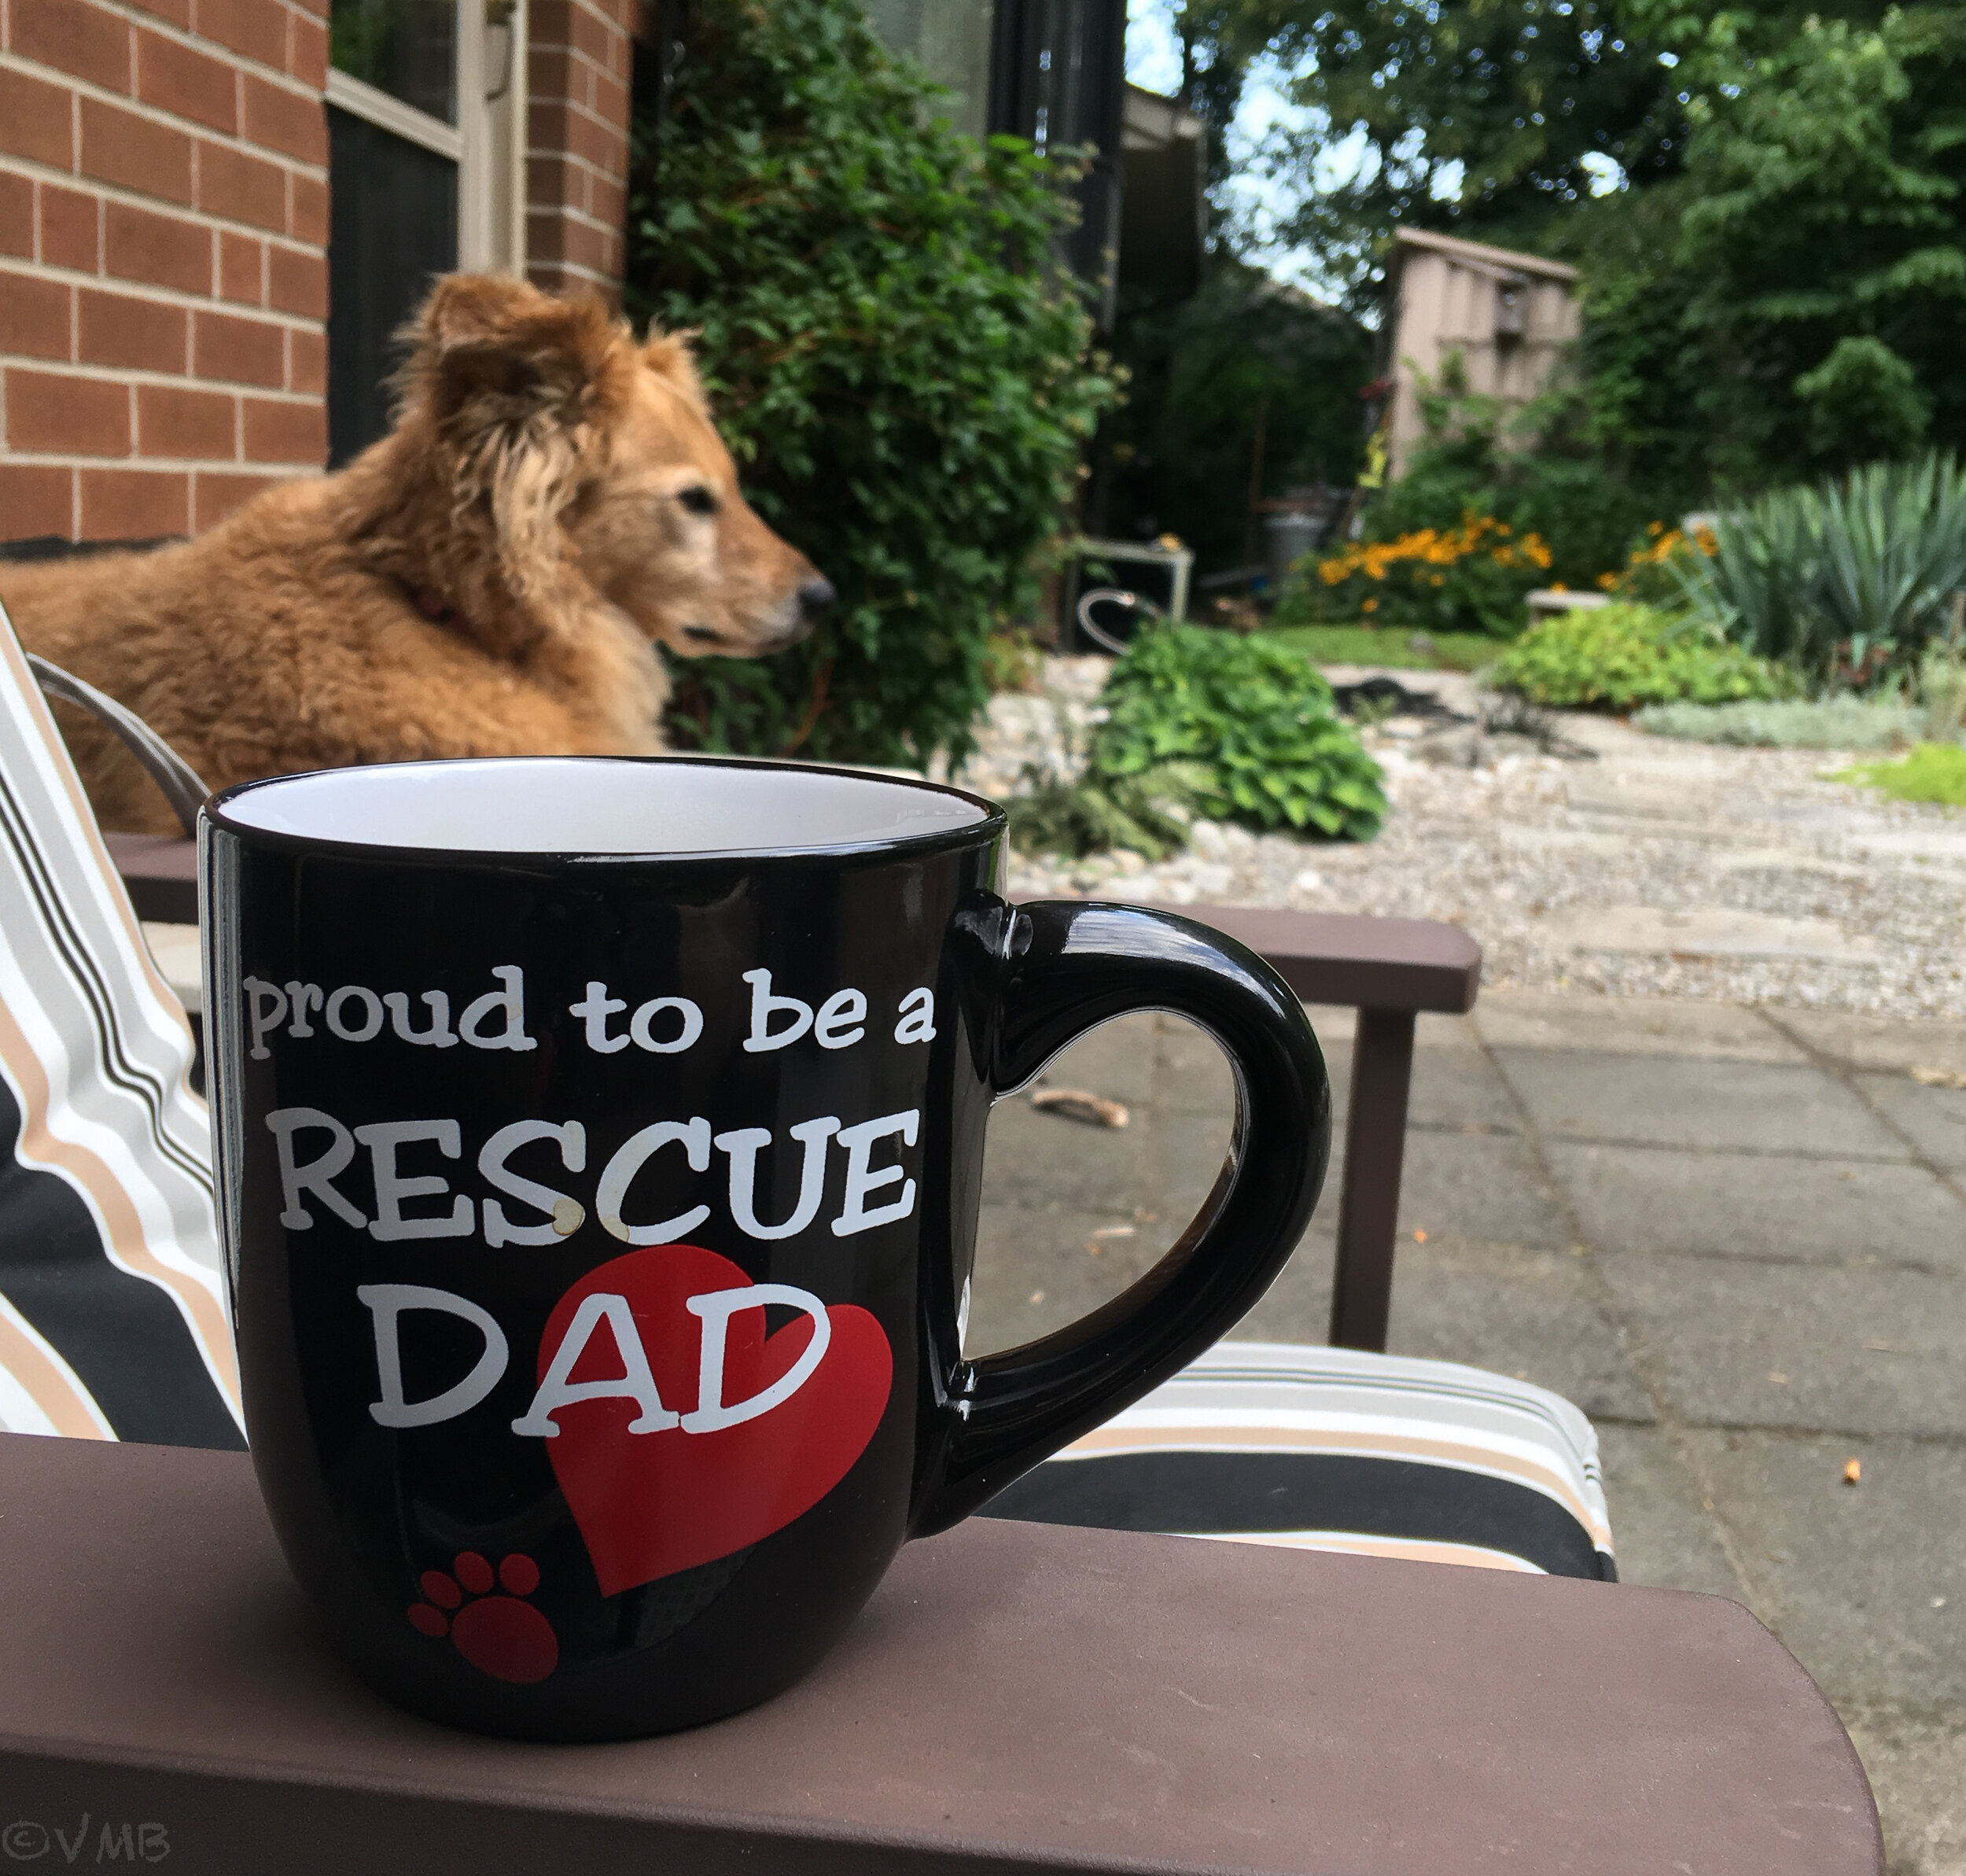 Mornings together on the patio, me with my coffee and her watching out for Woodland visitors to the garden.